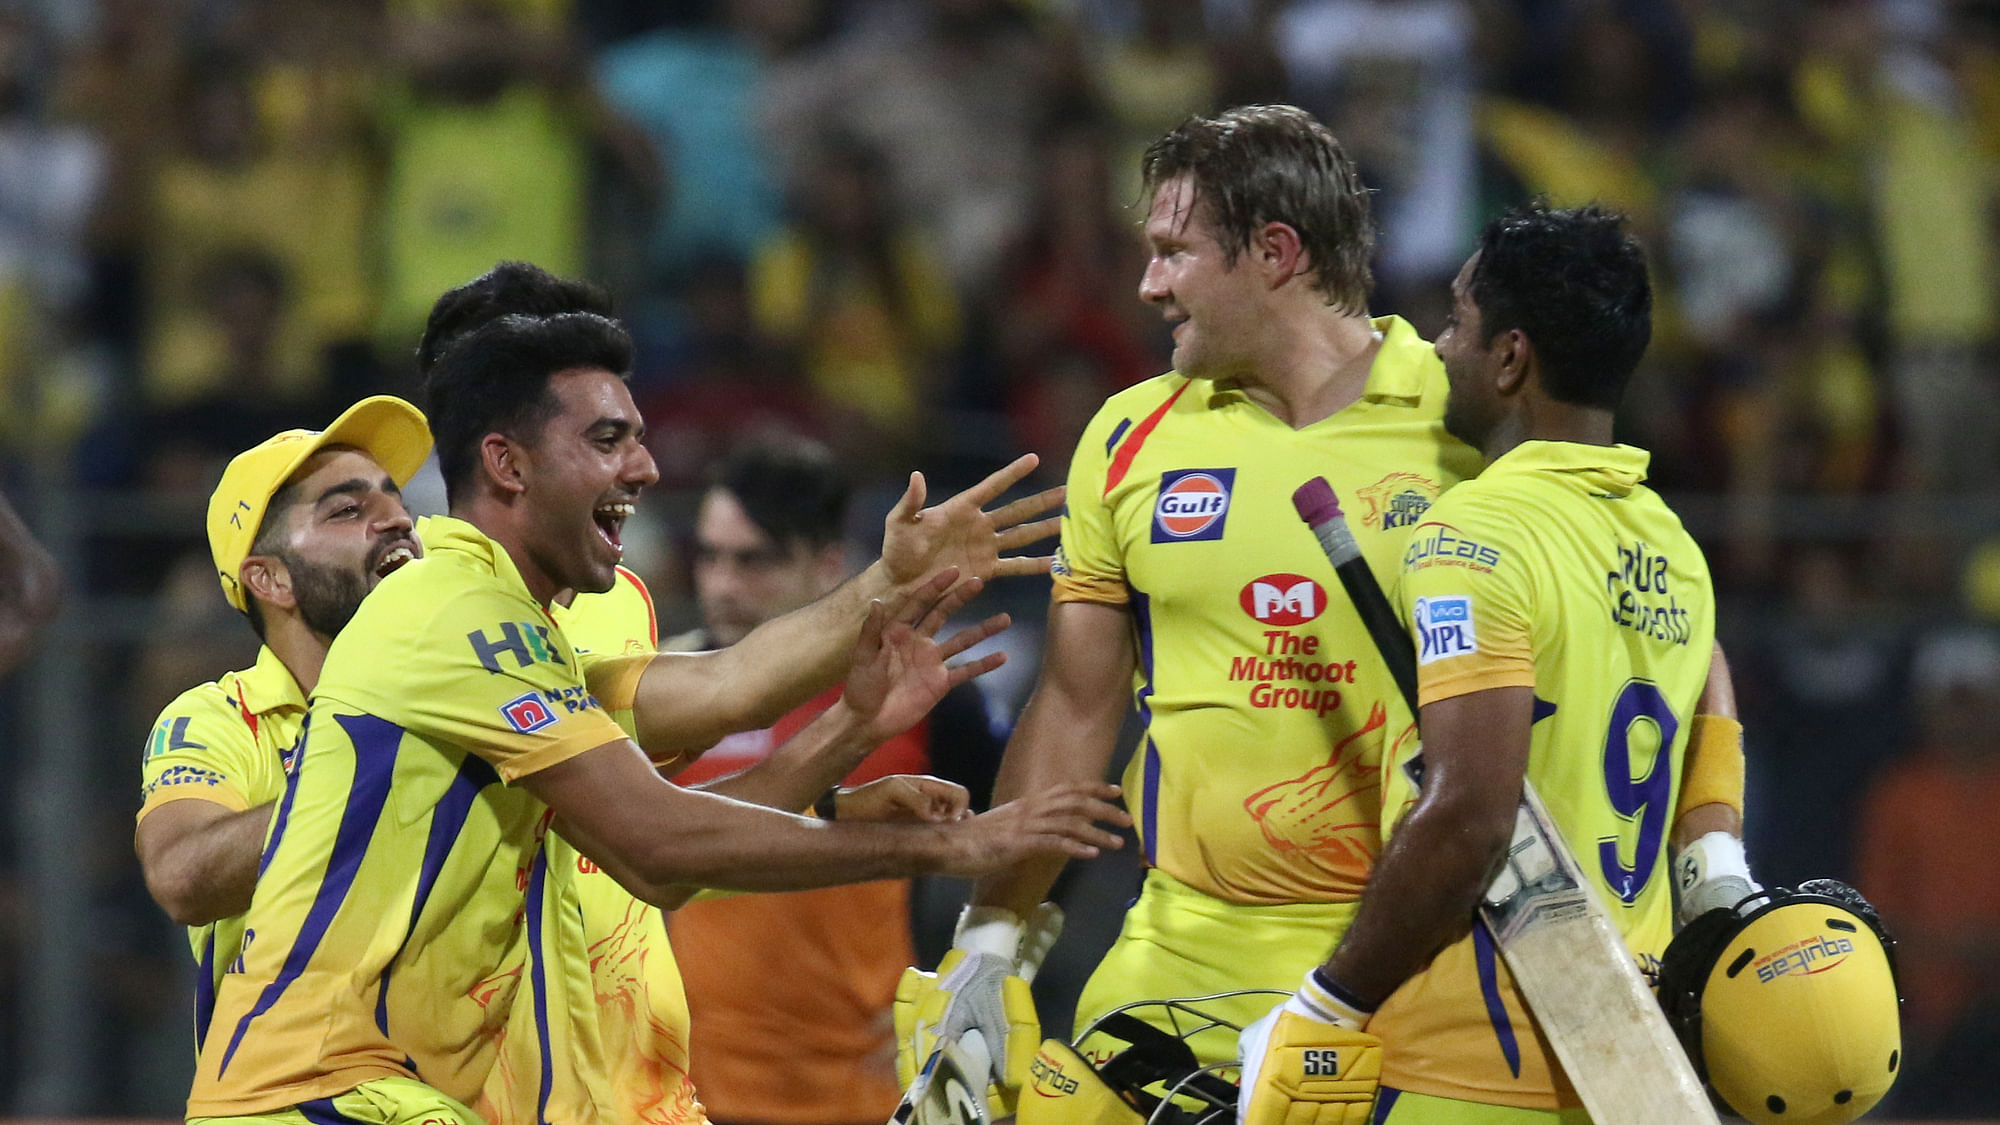 Chennai Super Kings players celebrate after winning the Final of the Vivo Indian Premier League 2018 (IPL 2018) between the Chennai Super Kings and the Sunrisers Hyderabad held at the Wankhede Stadium in Mumbai on the 27th May 2018.